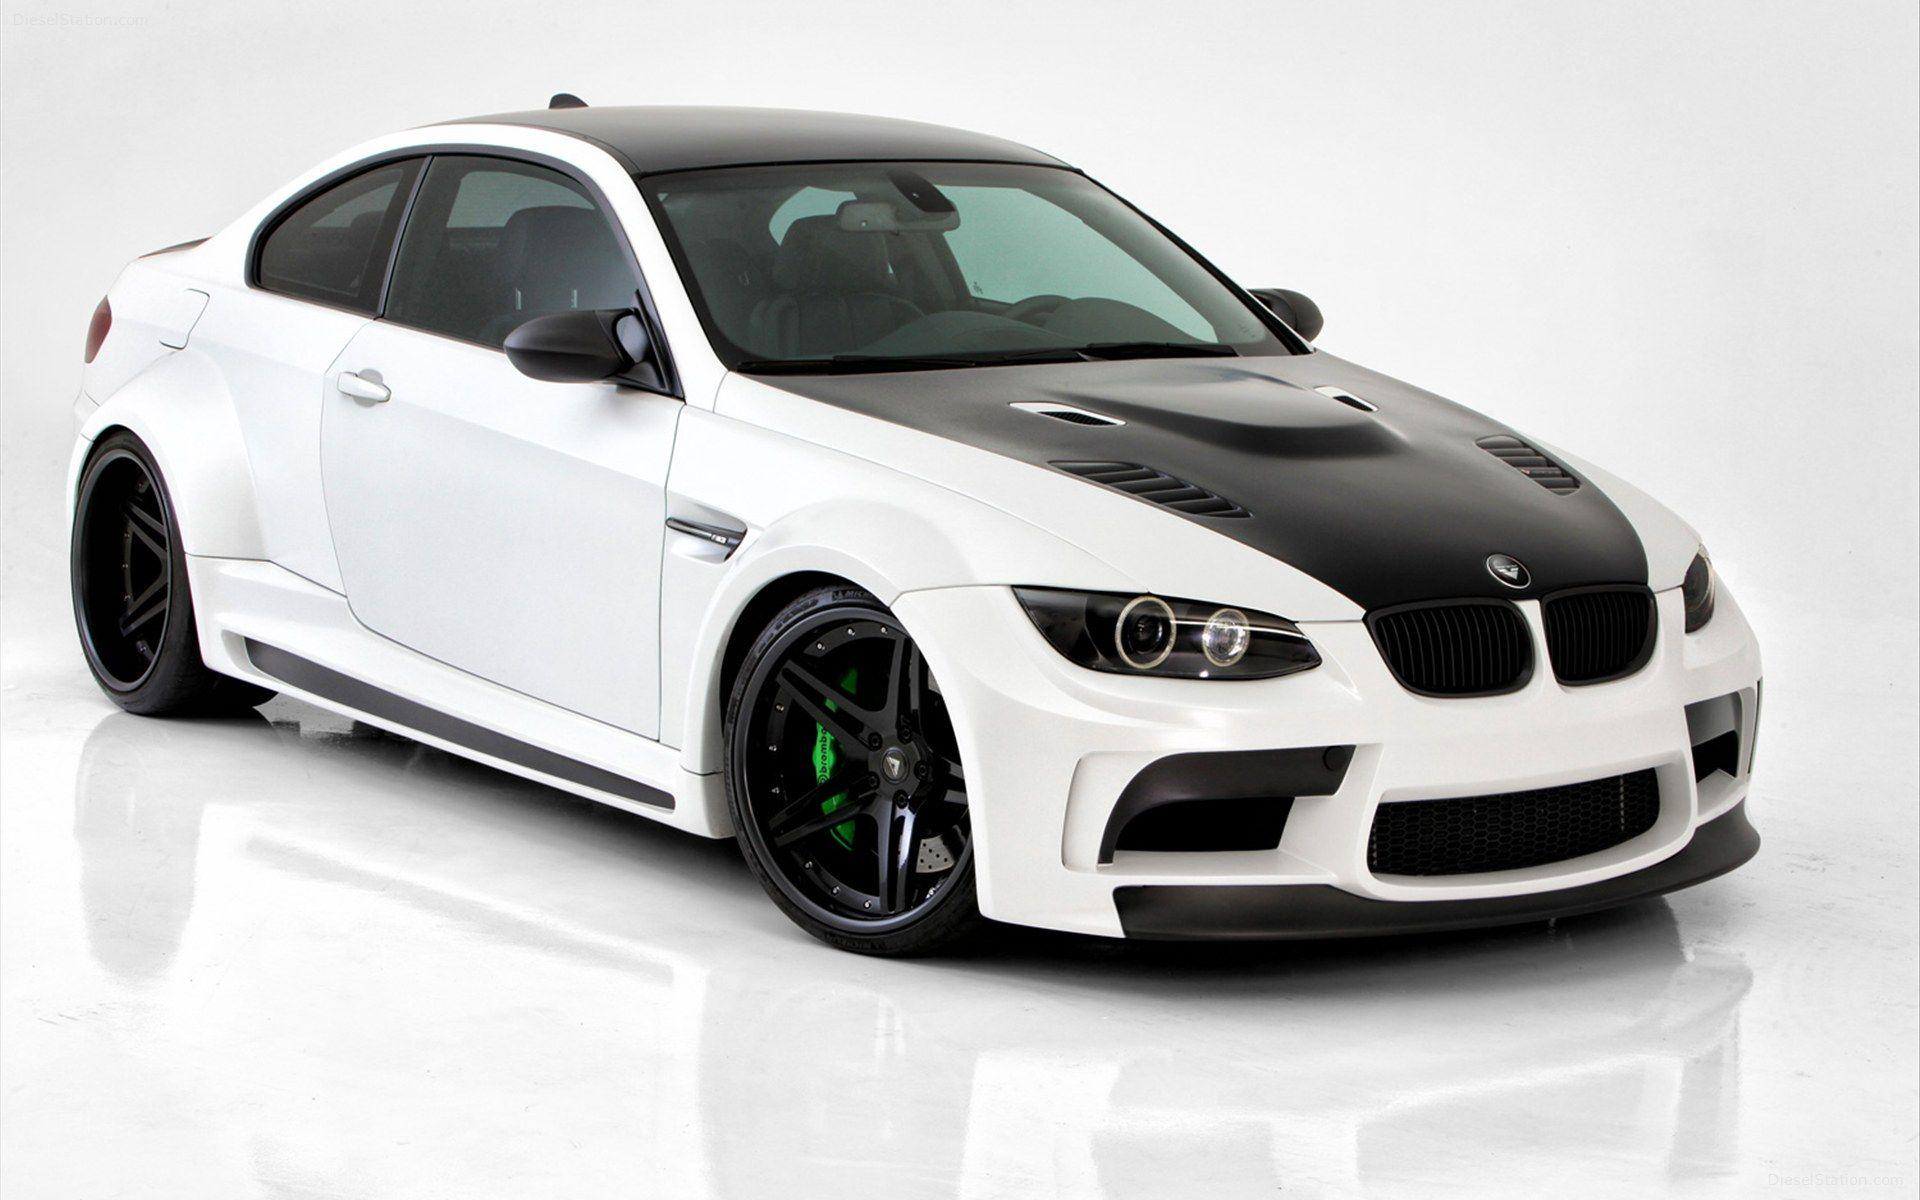 Bmw M3 Wallpapers Wallpaper Cave